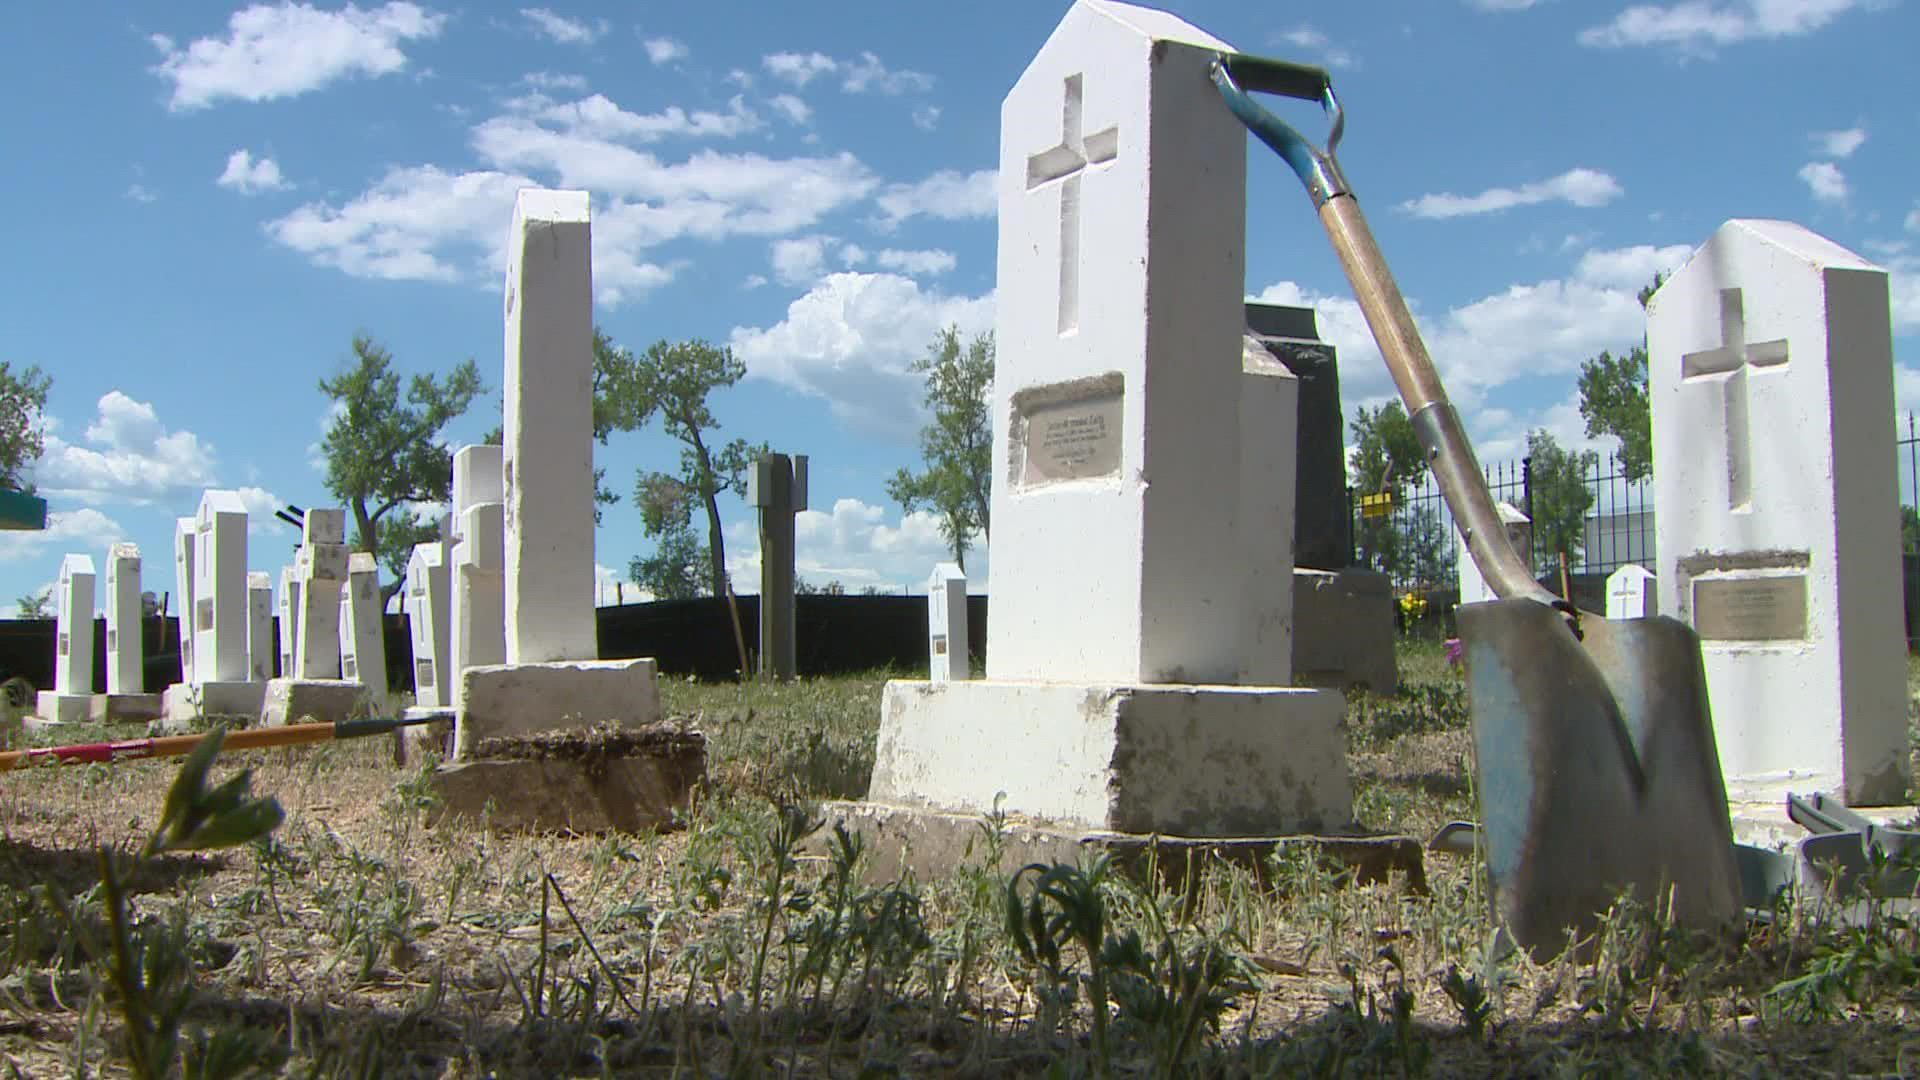 The remains of 62 nuns buried at Loretto Heights in Denver are being relocated.